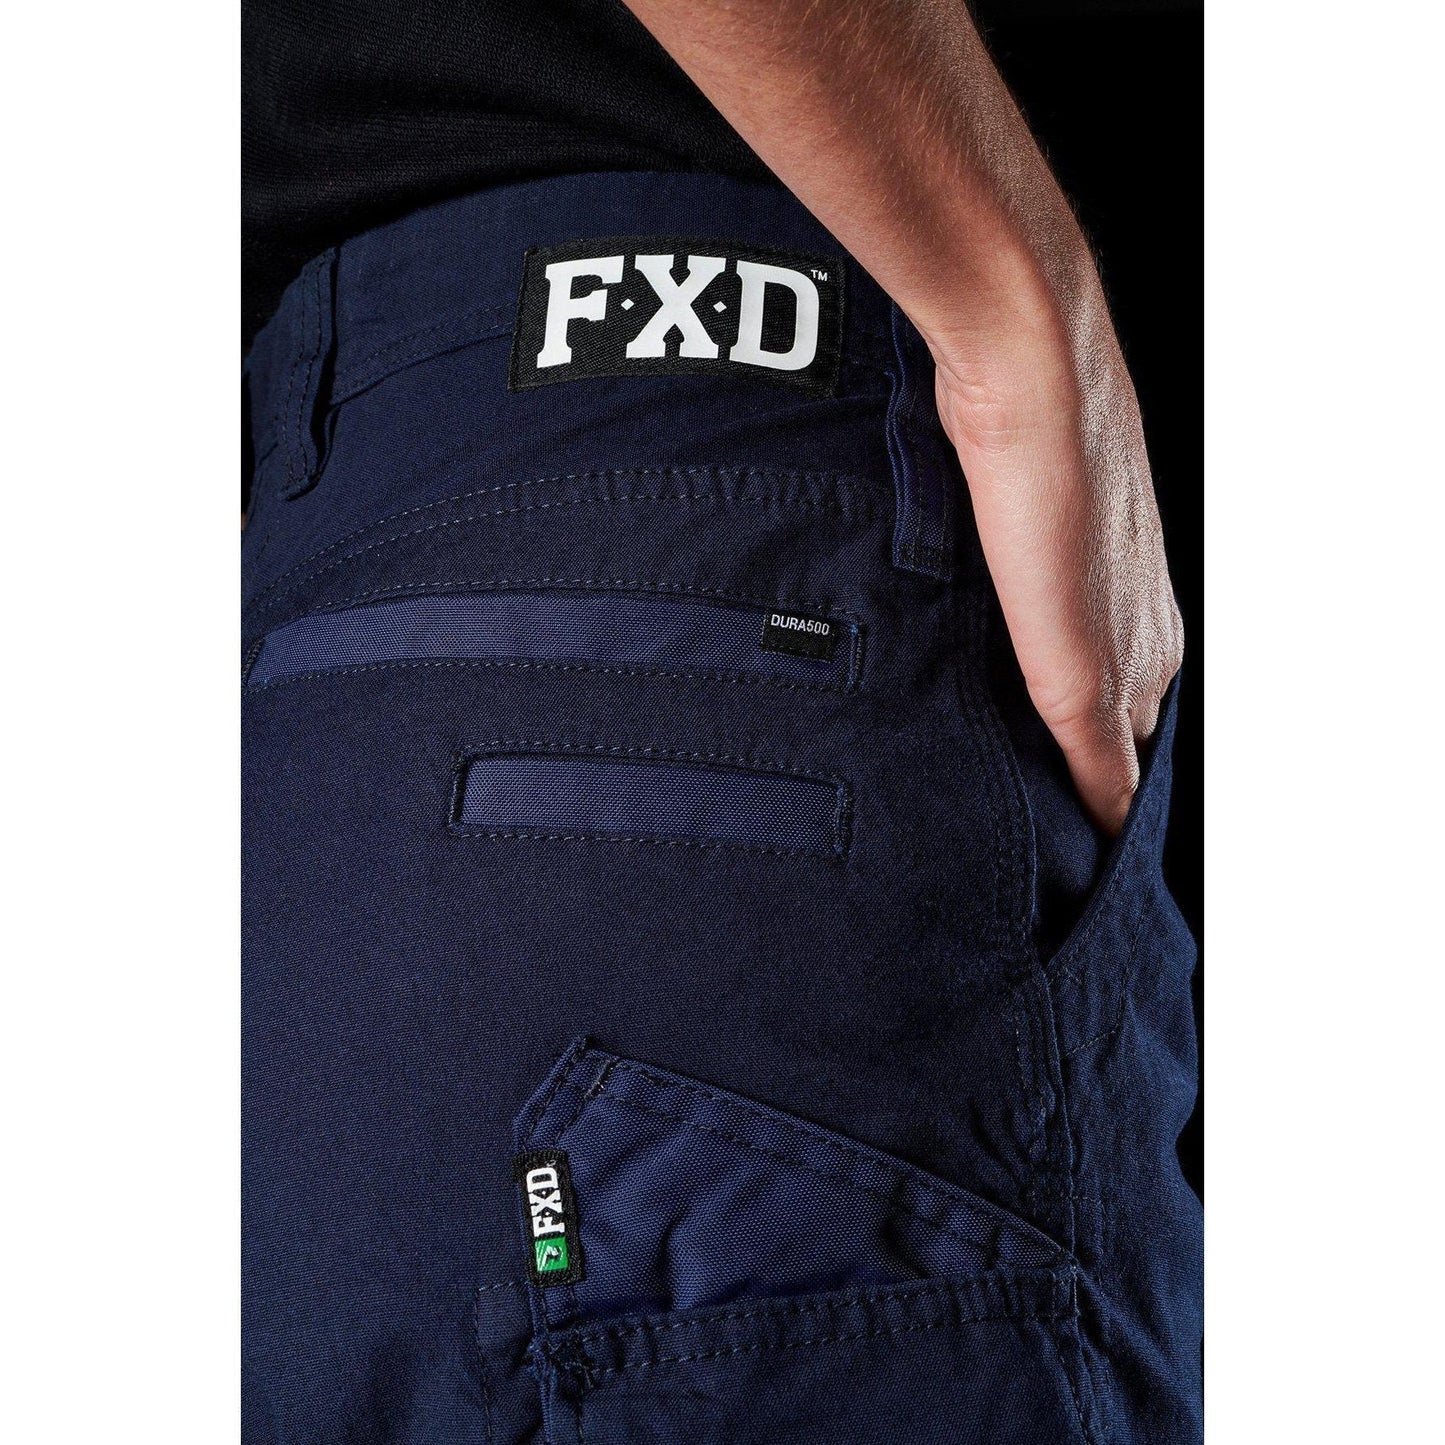 FXD Womens Stretch Shorts - WS-3W – Blue Heeler Boots